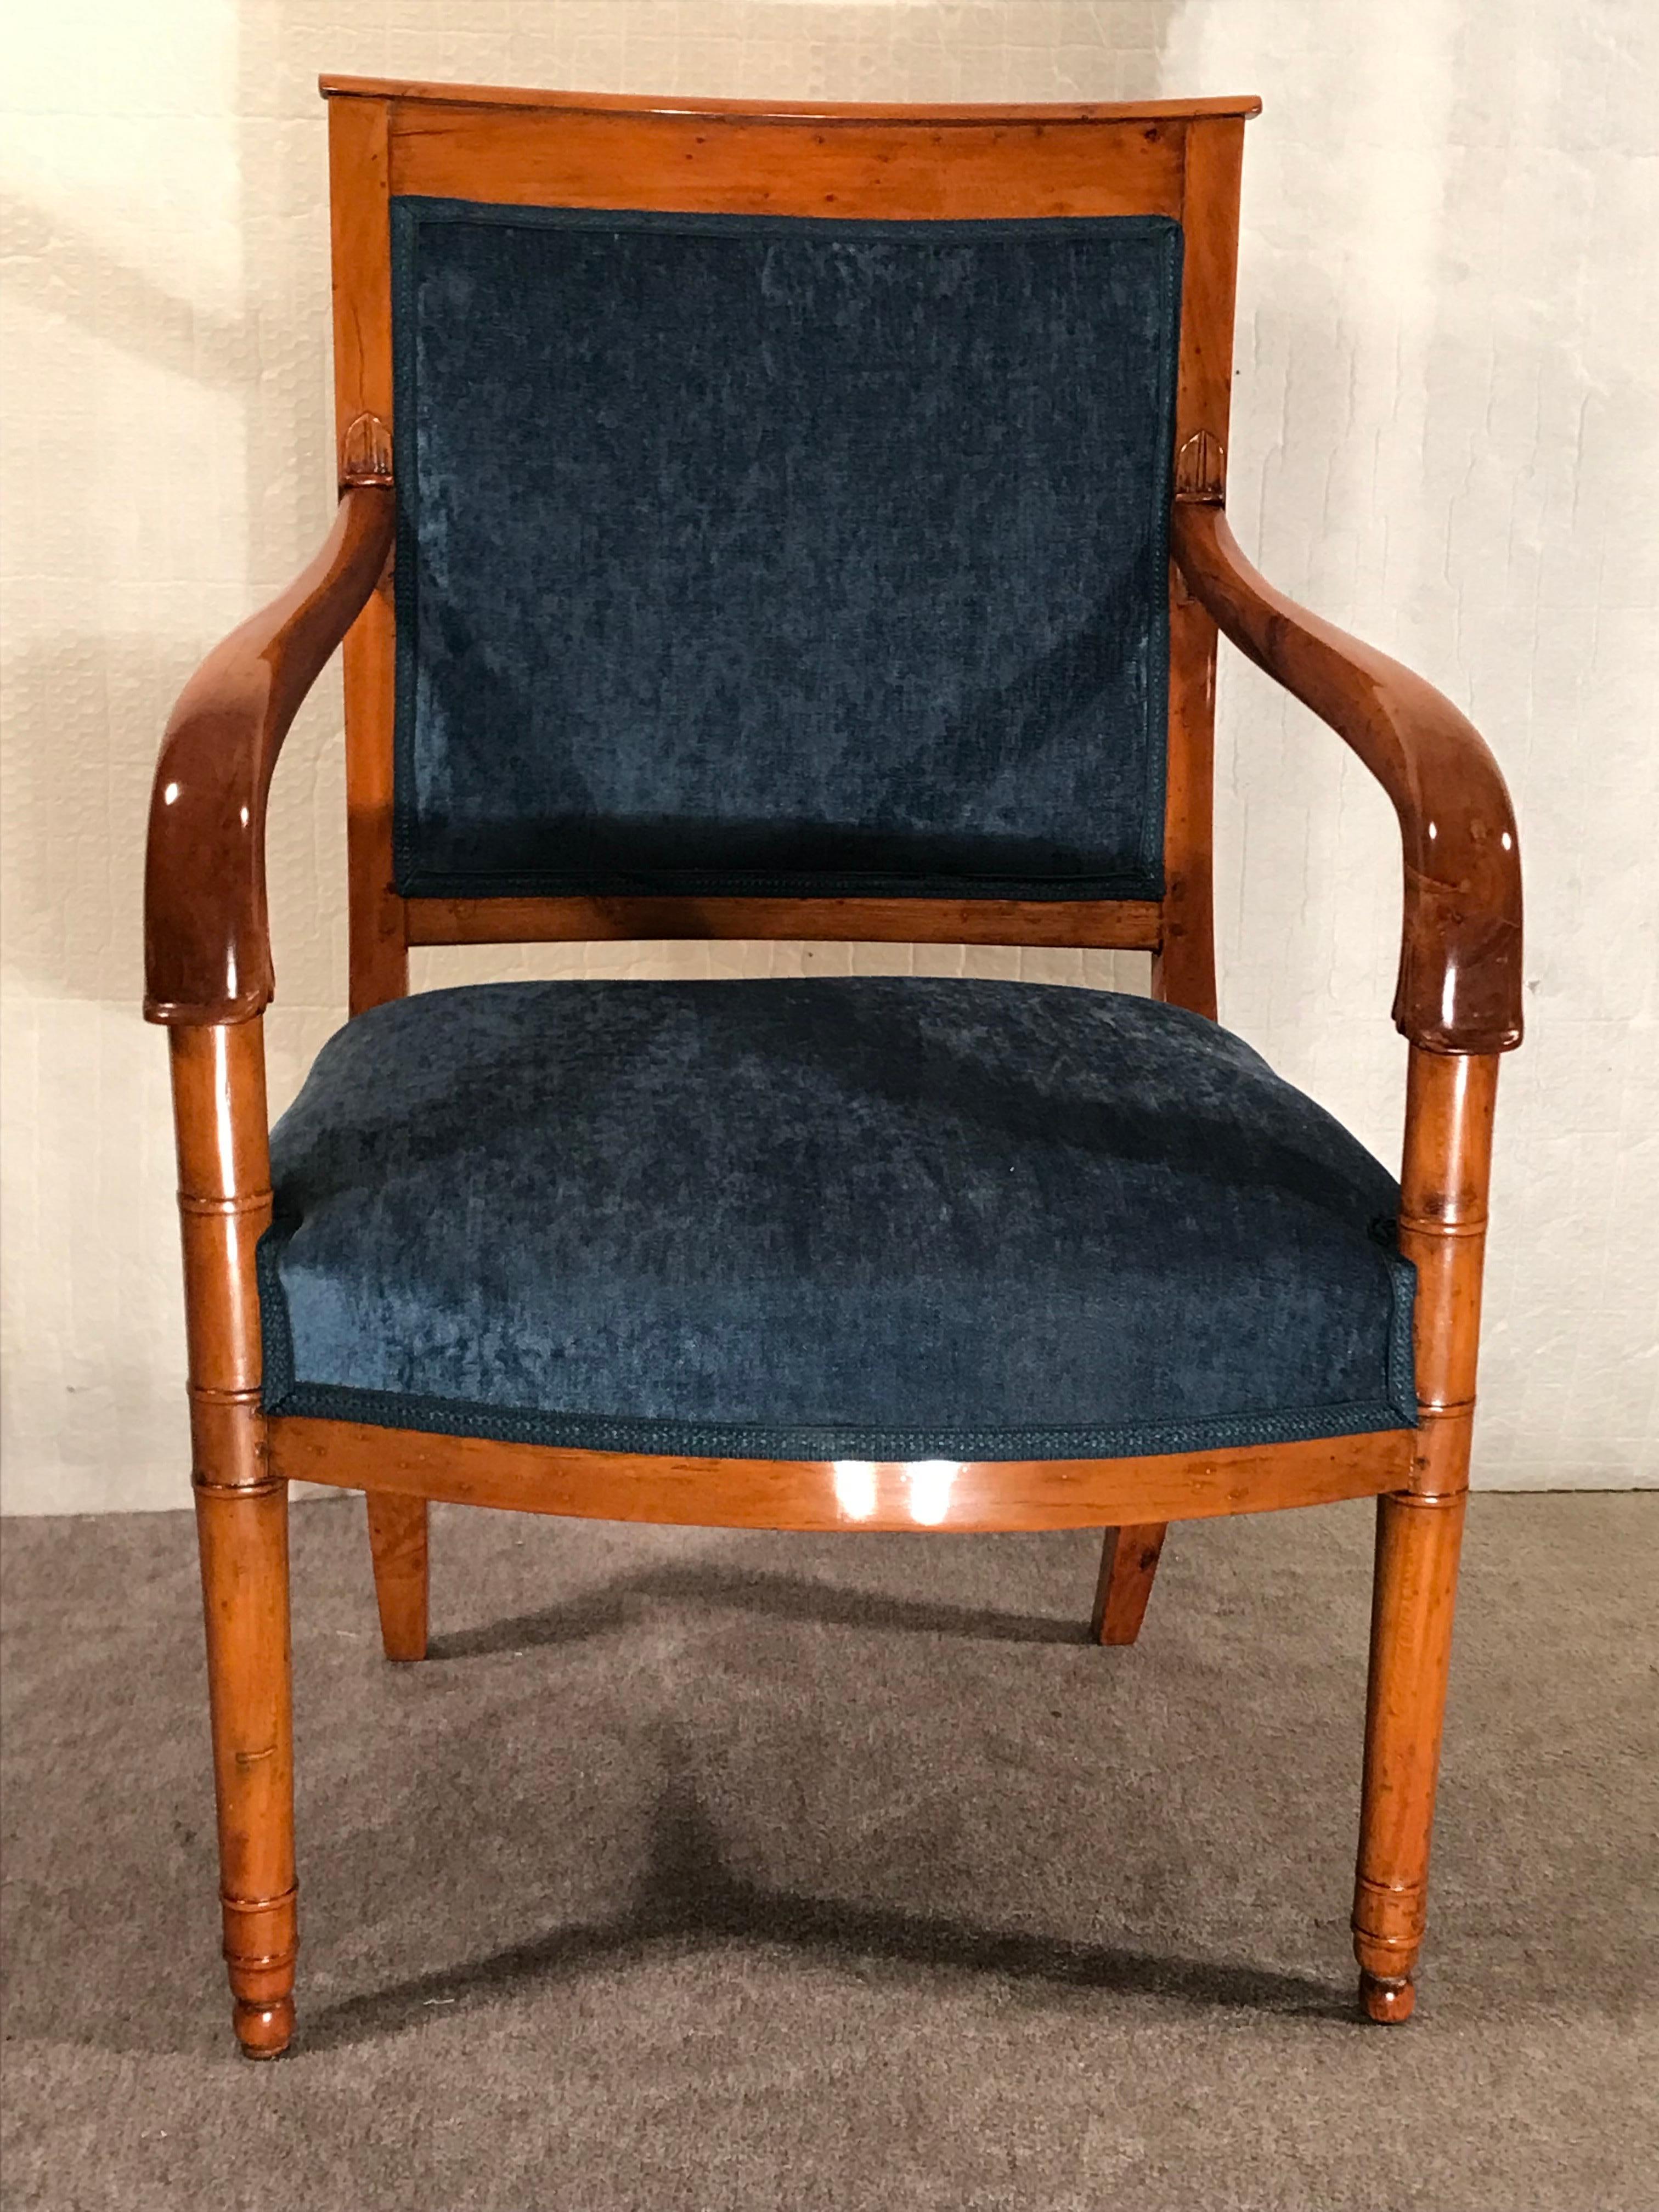 This set of four Empire armchairs dates back to around 1810. The elegant armchairs have a pretty cherry wood frame. The armrest and front legs have a hand carved decor. Their plain design makes them easy to combine with different interior styles.